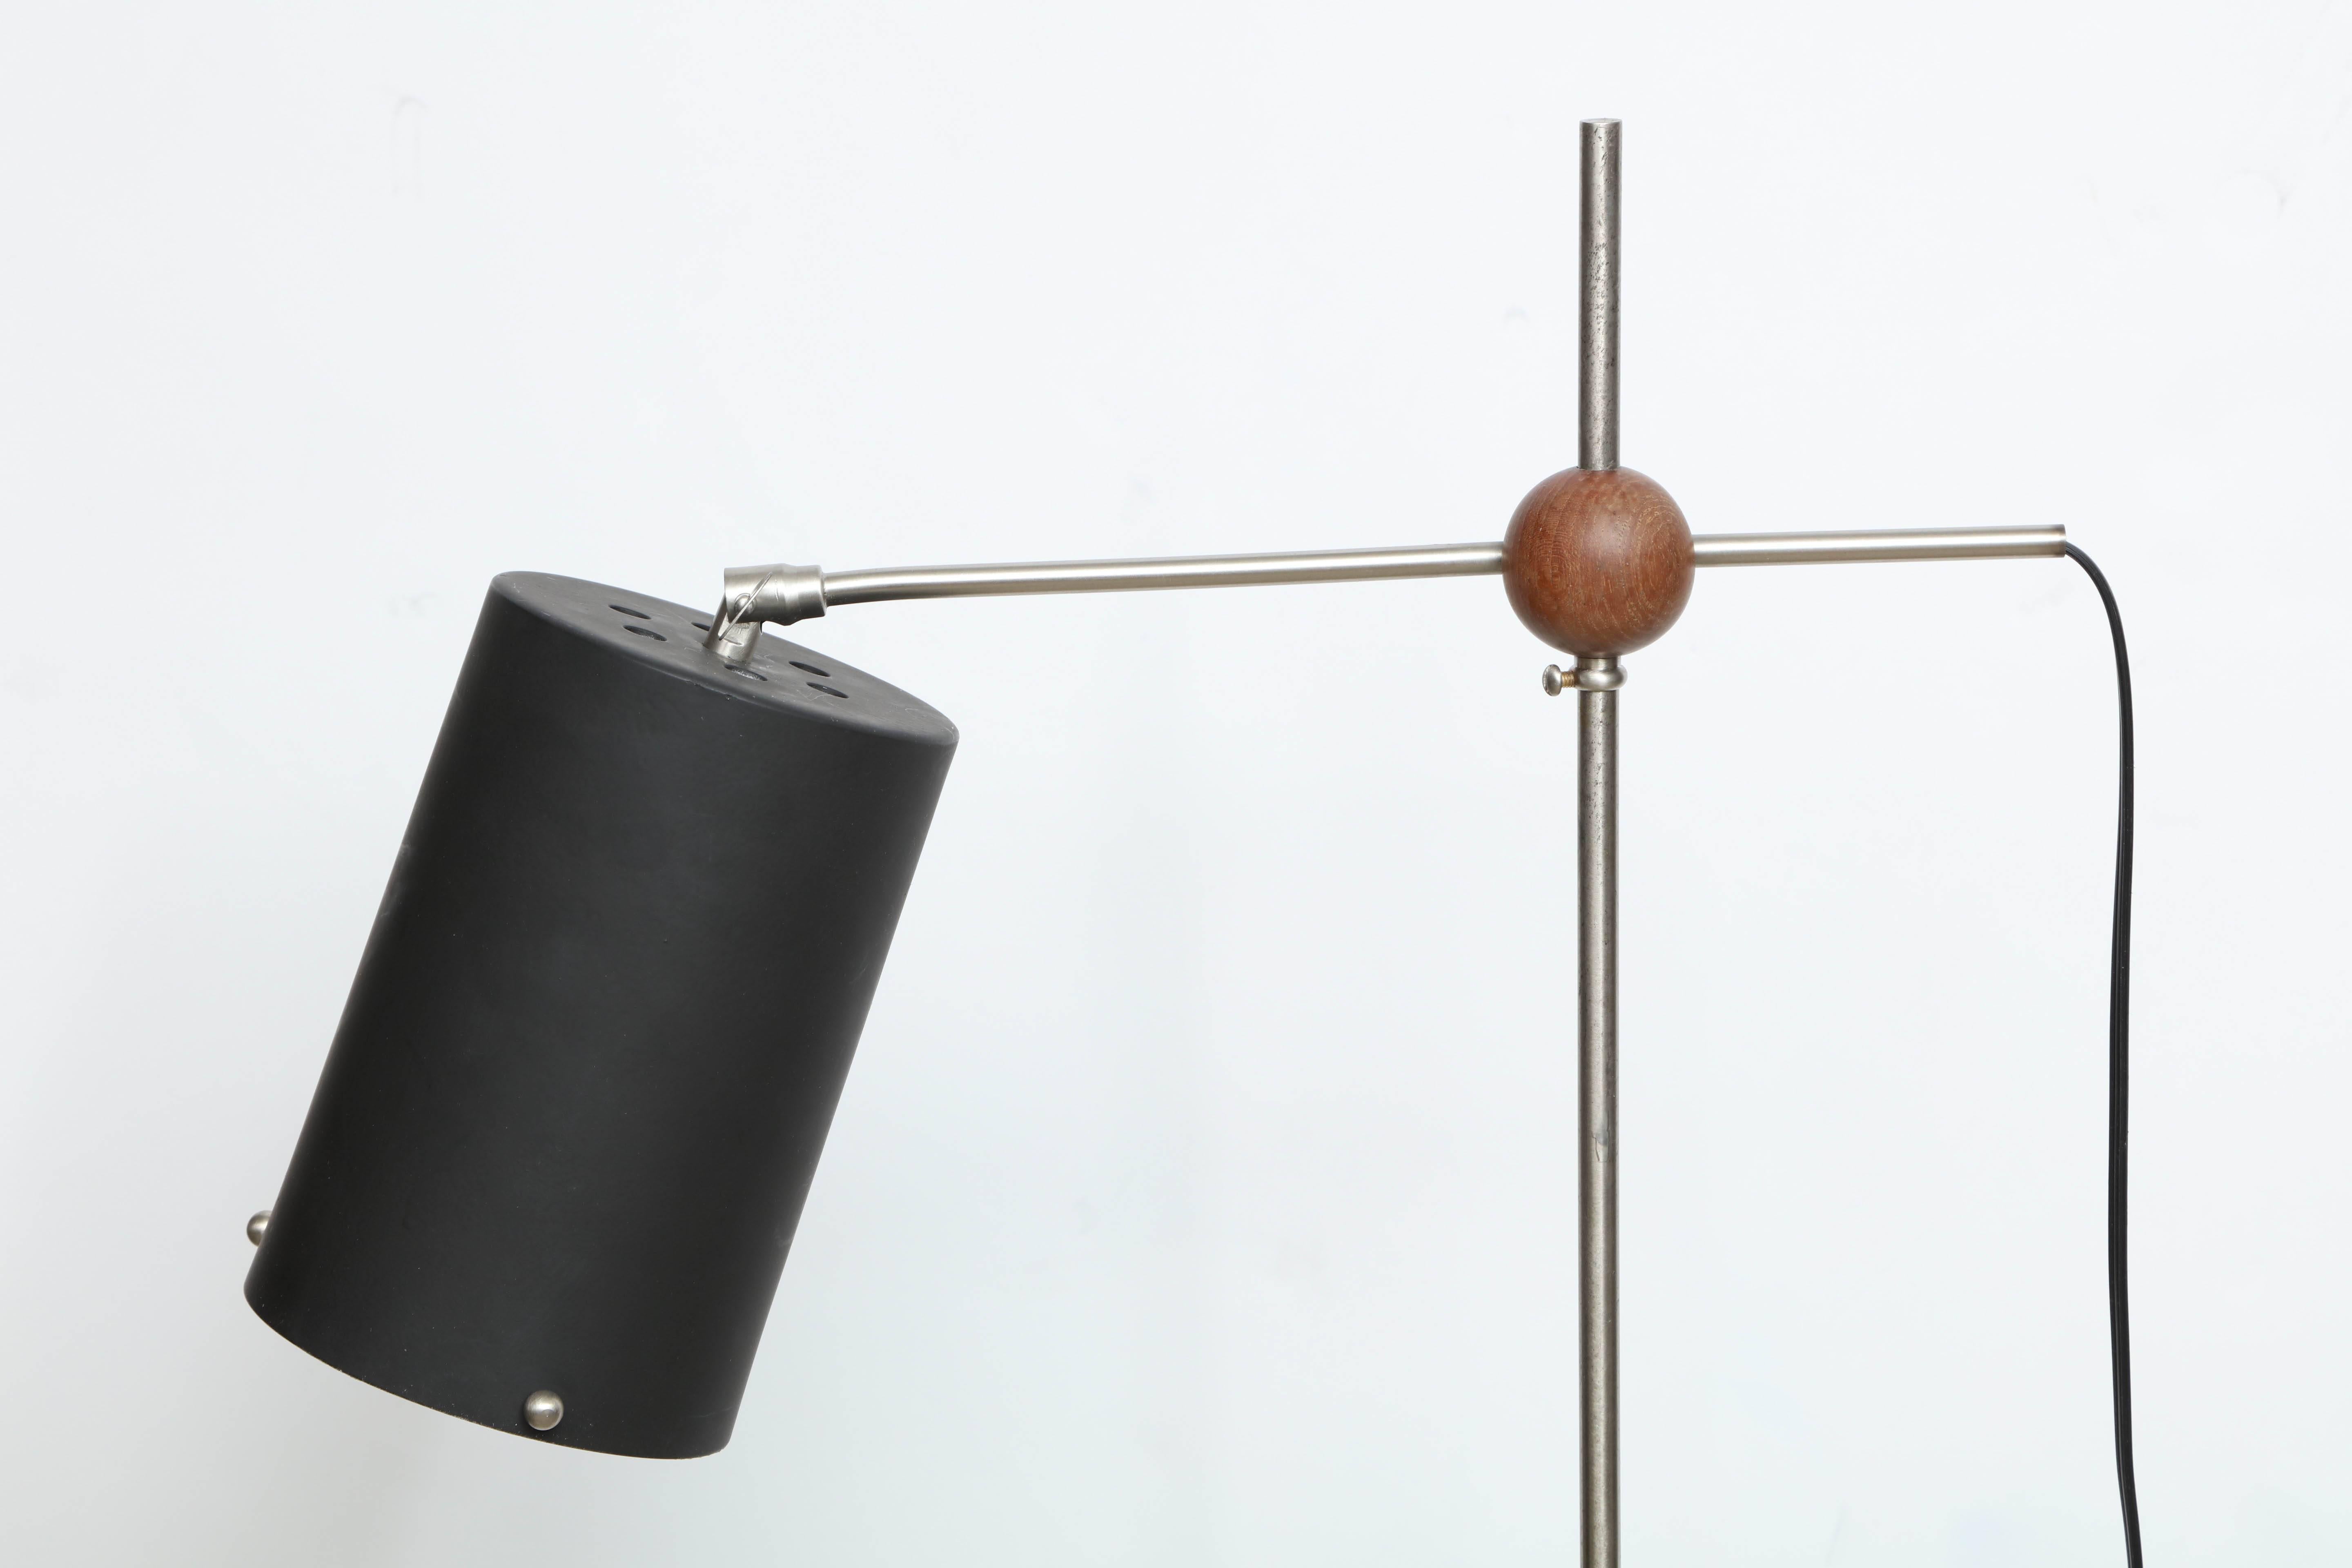 A cast iron cylinder supports a dull nickel rod piercing a teak sphere which connects a nickel cross-bar to a painted aluminium cylinder shade and permits adjustment to any height, Finnish, 1950s. Newly rewired for US usage and repainted to original